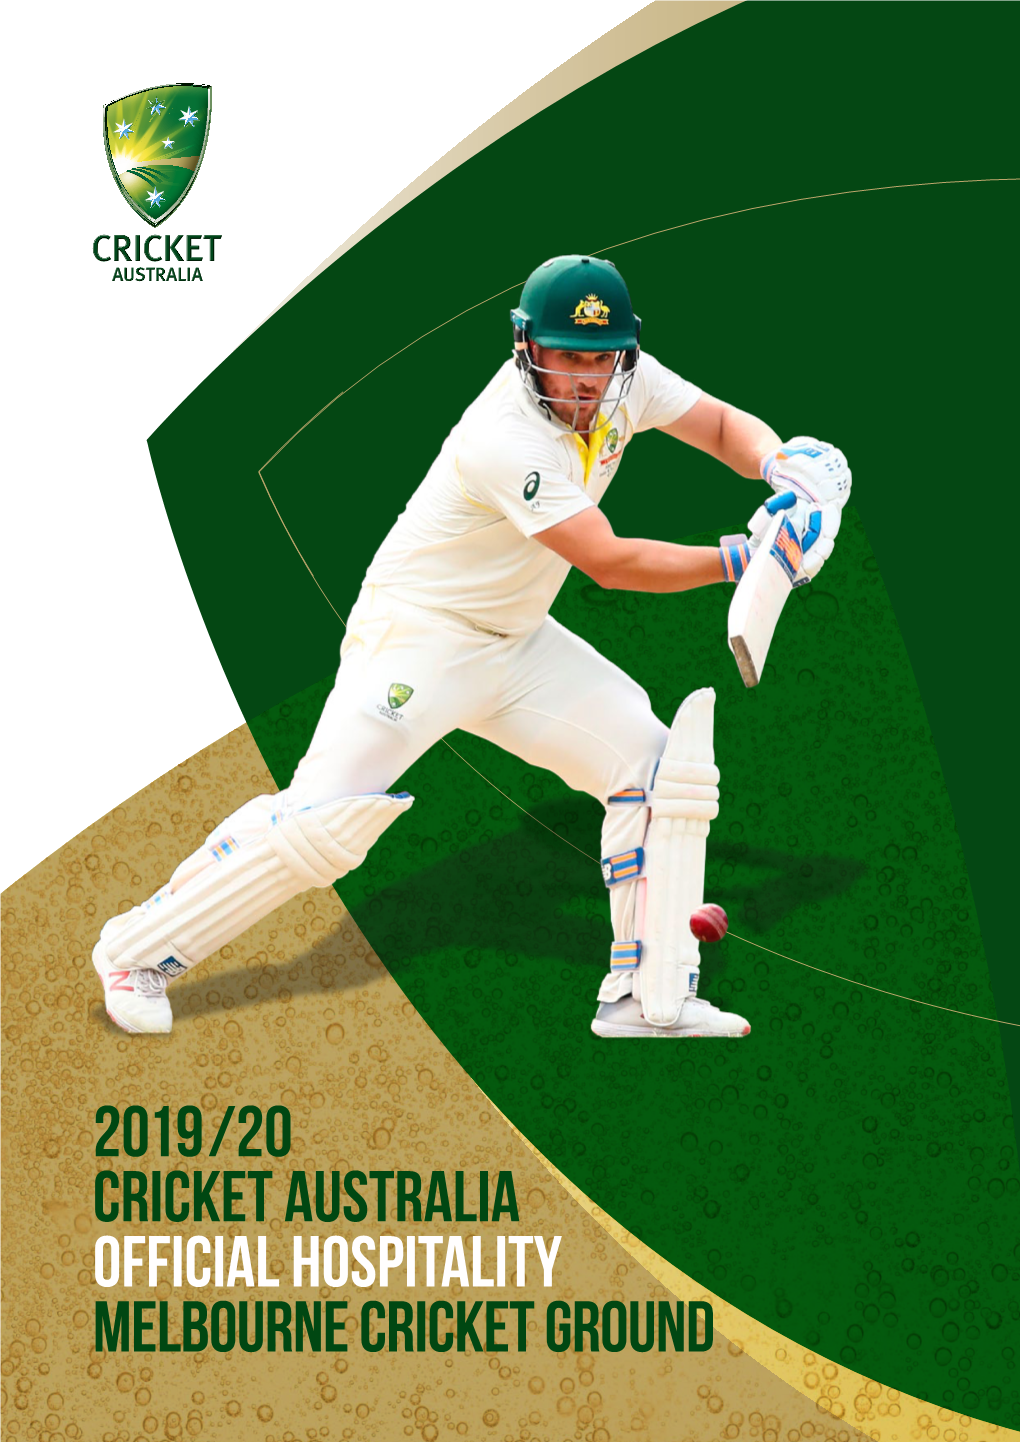 2019/20 Cricket Australia Official Hospitality Melbourne Cricket Ground ——— WELCOME ——— 2019–20 FIXTURE